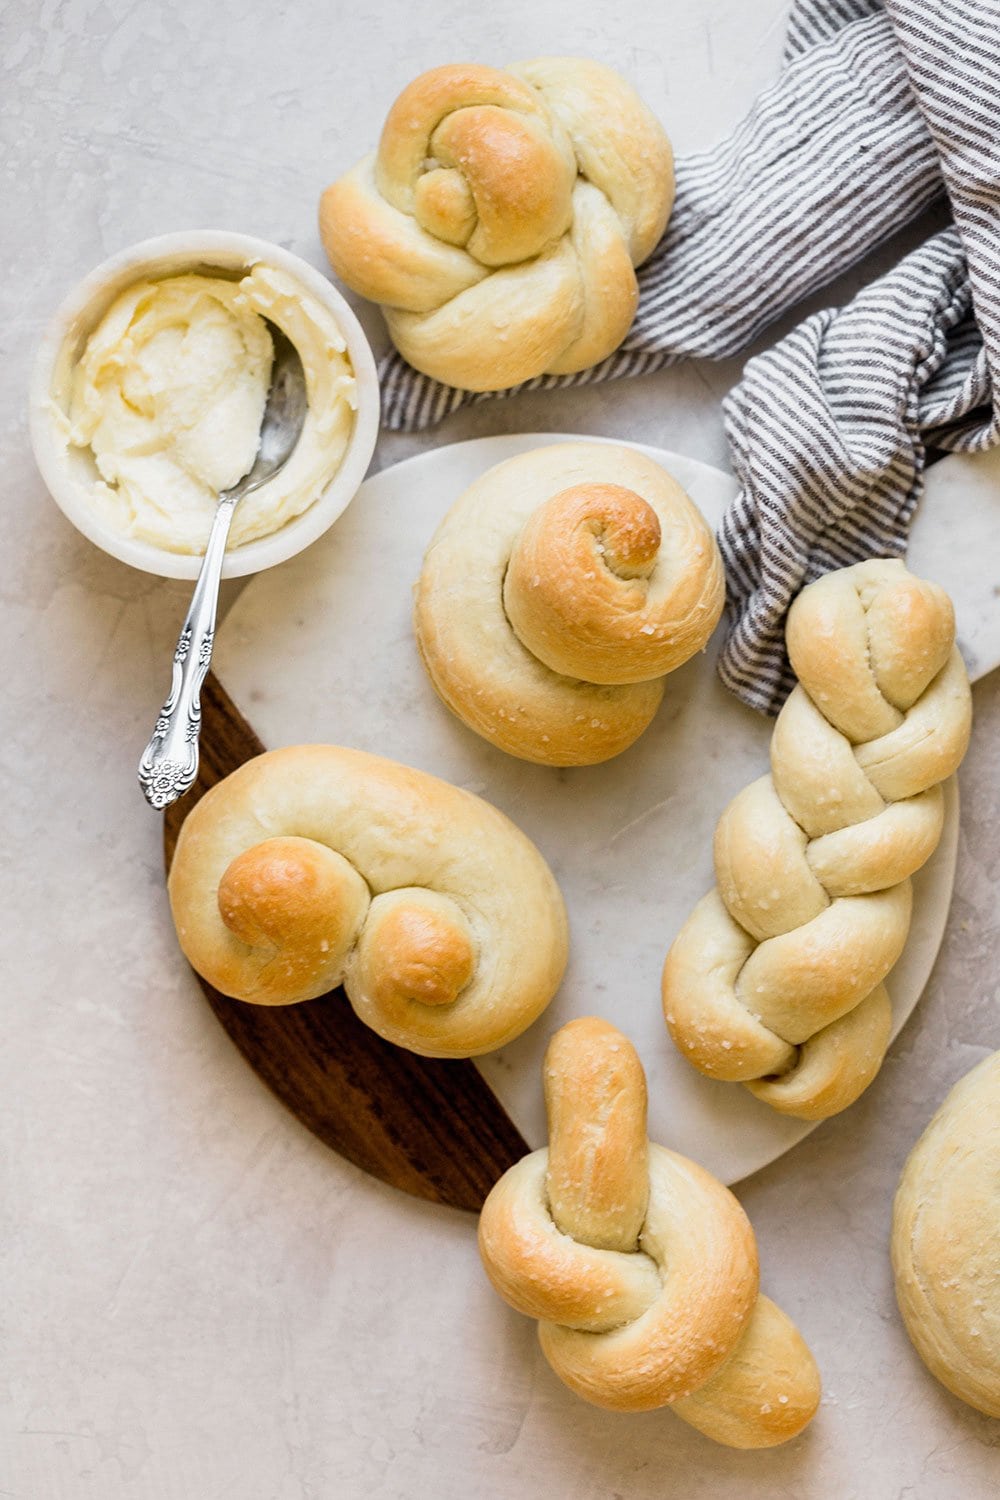 5 EASY ways to shape bread rolls to make them beautiful for any special occasion or holiday!